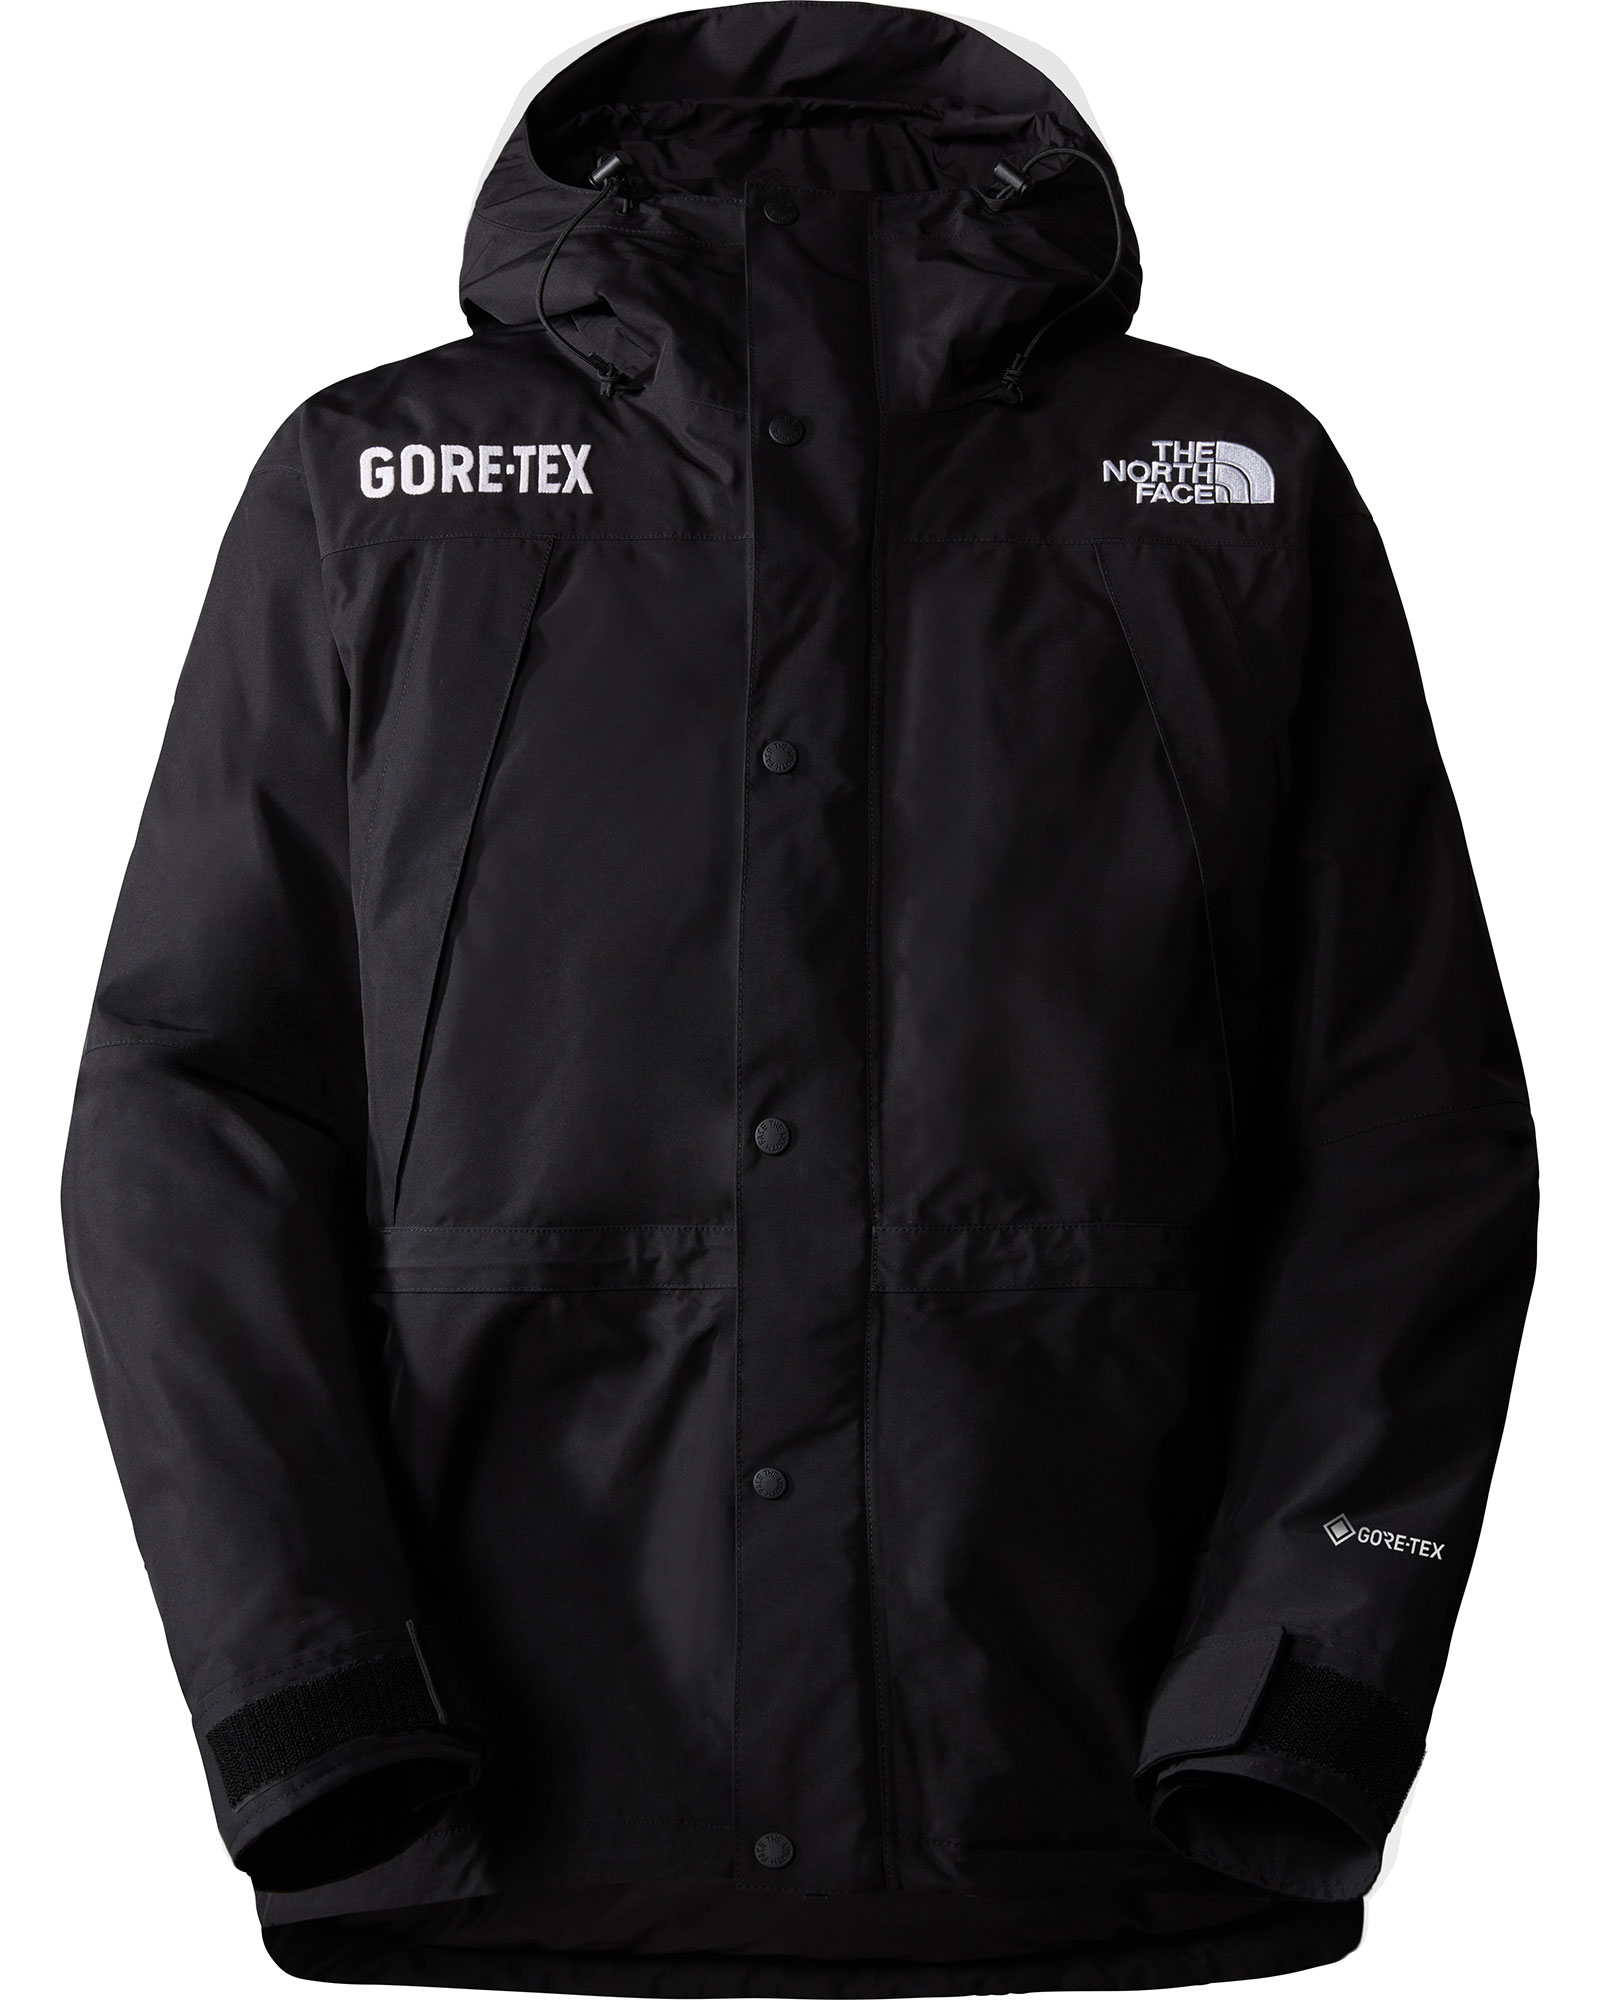 The North Face Men’s Mountain Guide Insulated GORE TEX Jacket - TNF Black XL